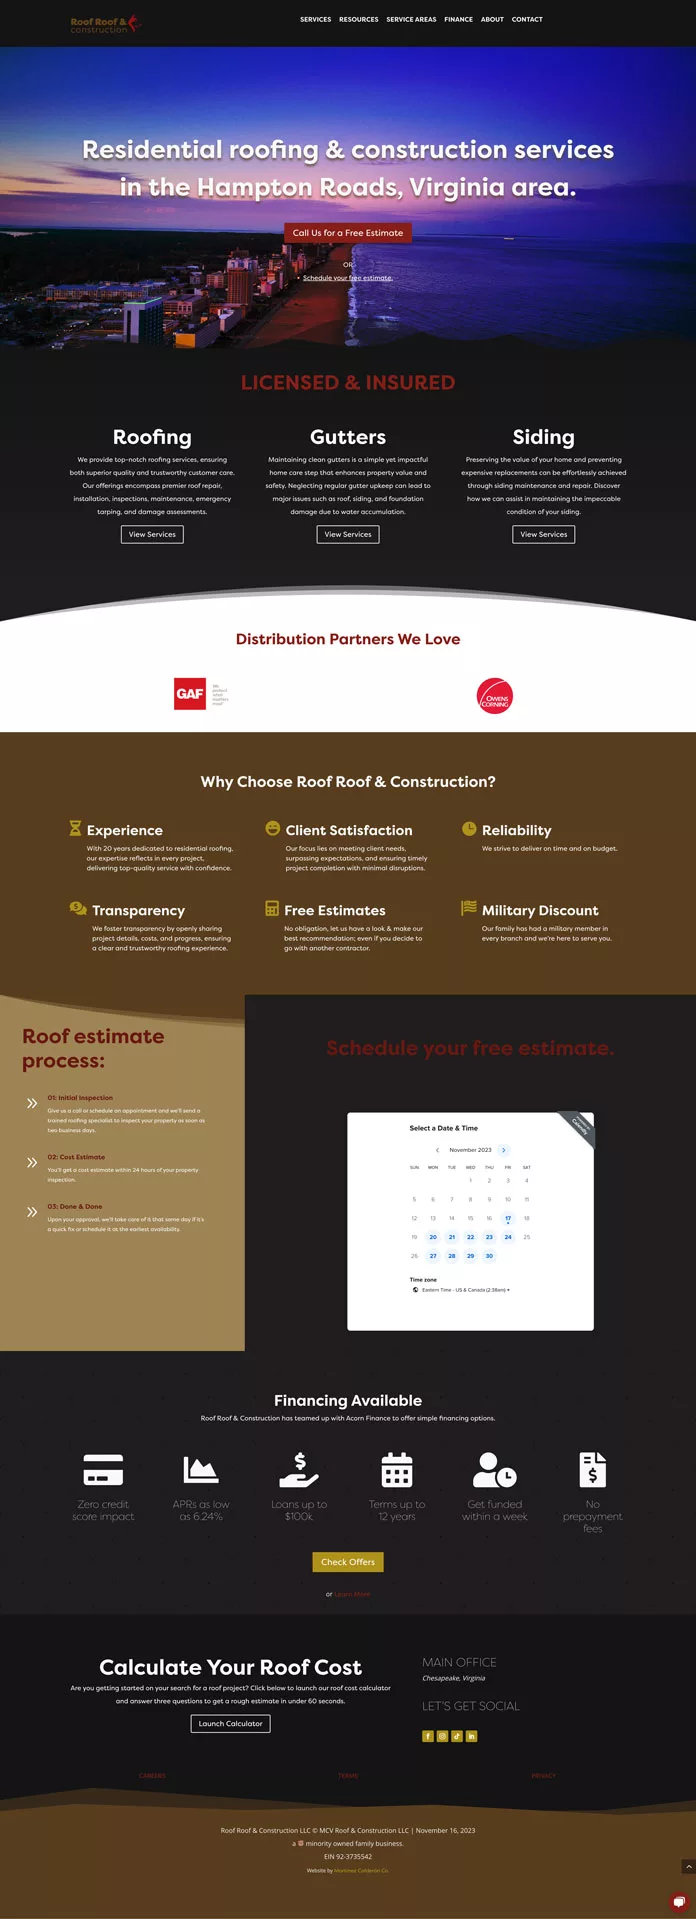 Roof Roof & Construction full website home page.